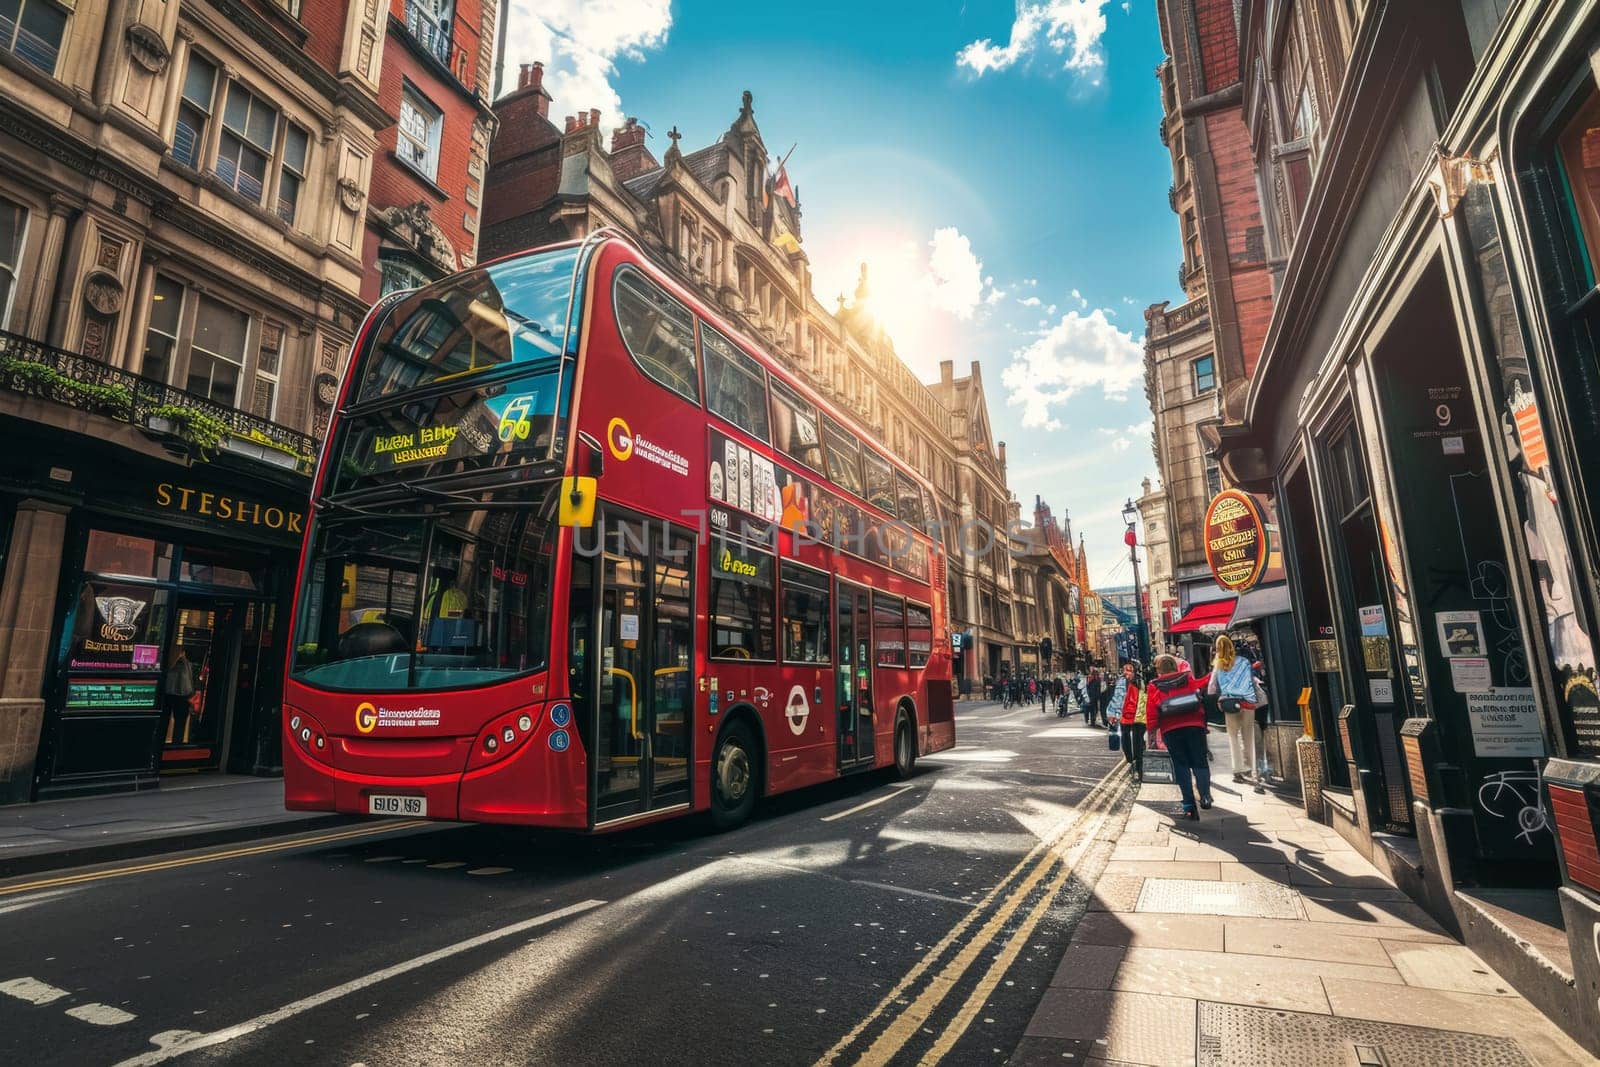 Iconic red double-decker bus travels through the streets of London with the historic Big Ben and the Houses of Parliament in the background.